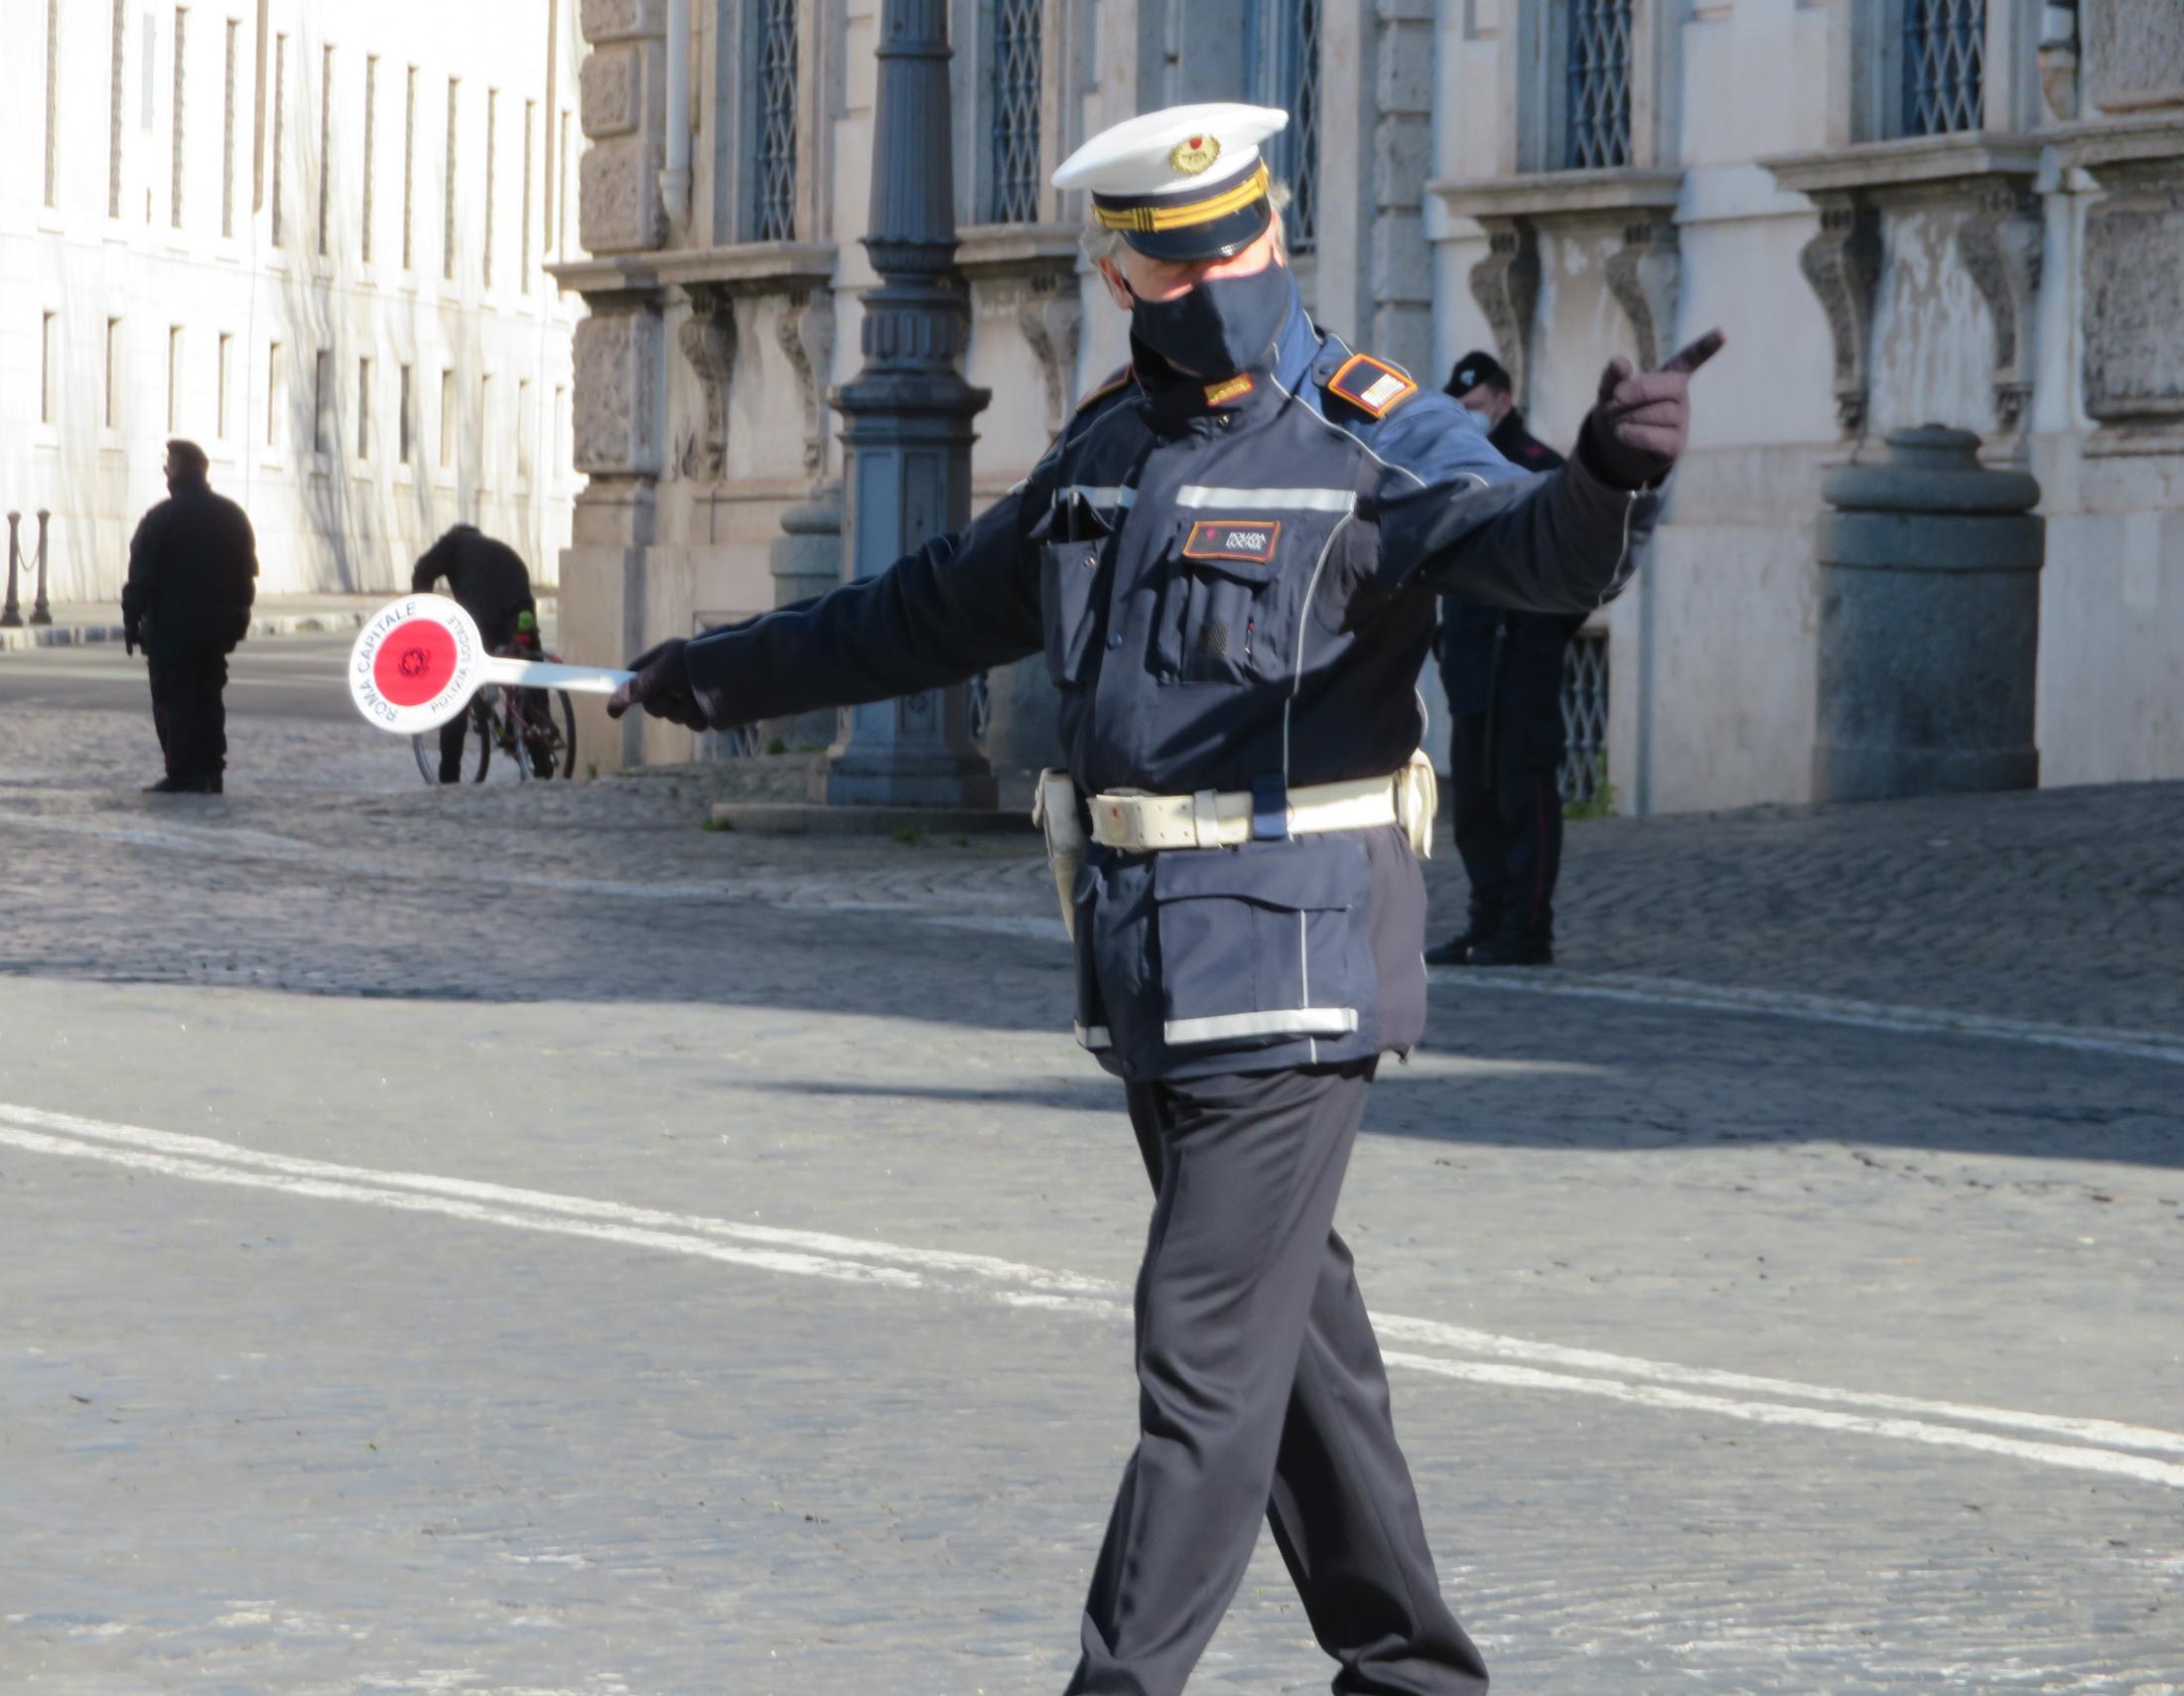 Italian security forces